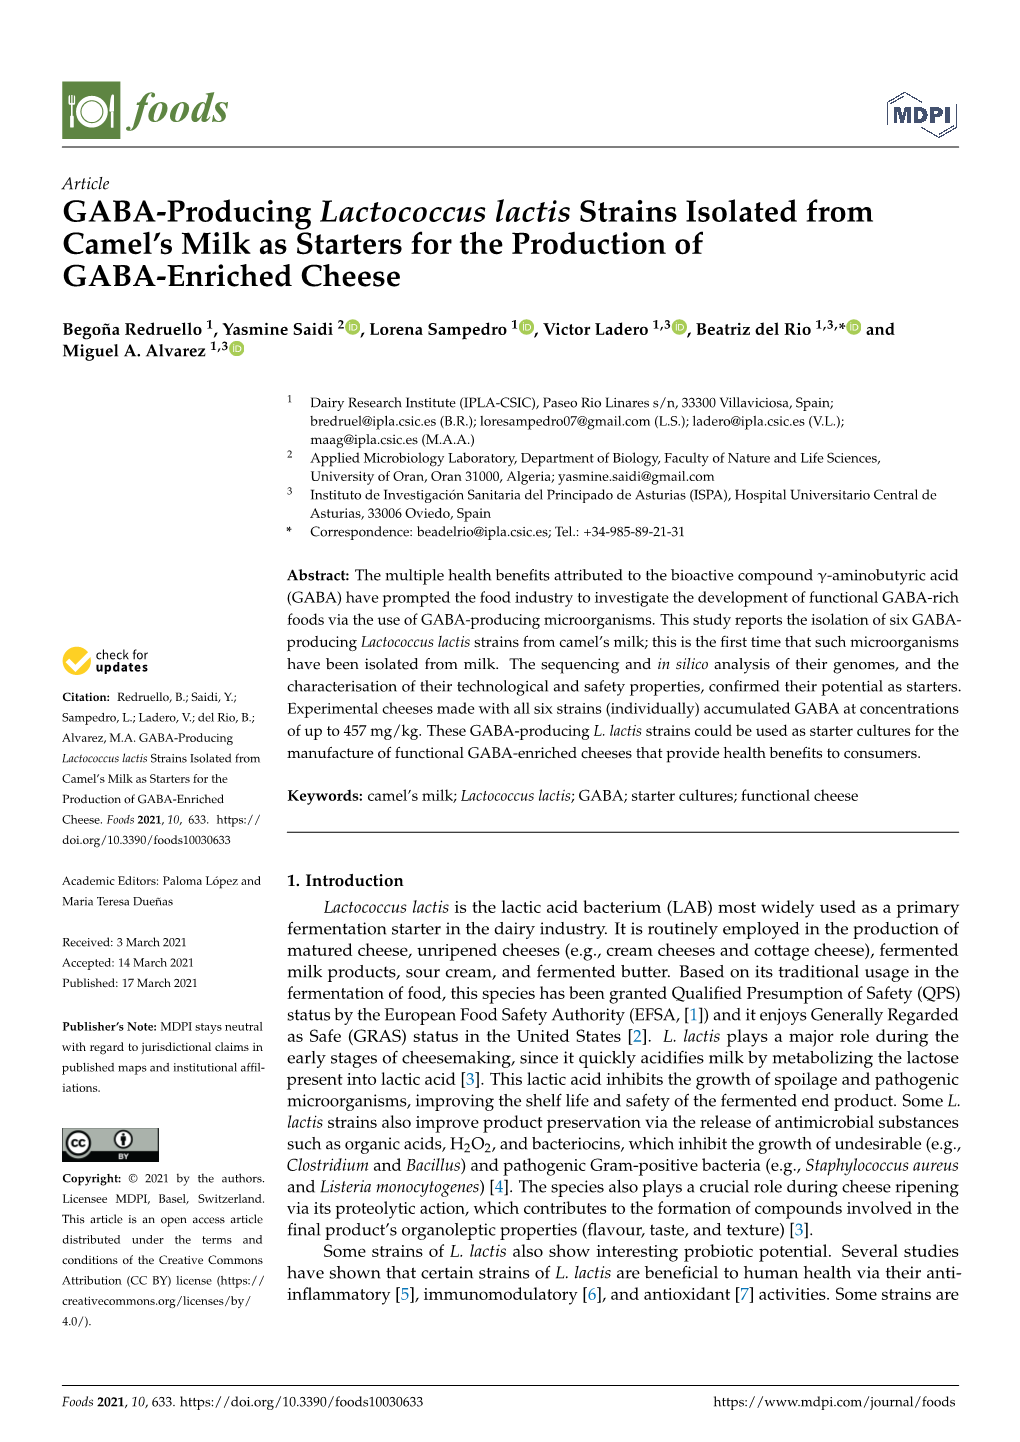 GABA-Producing Lactococcus Lactis Strains Isolated from Camel's Milk